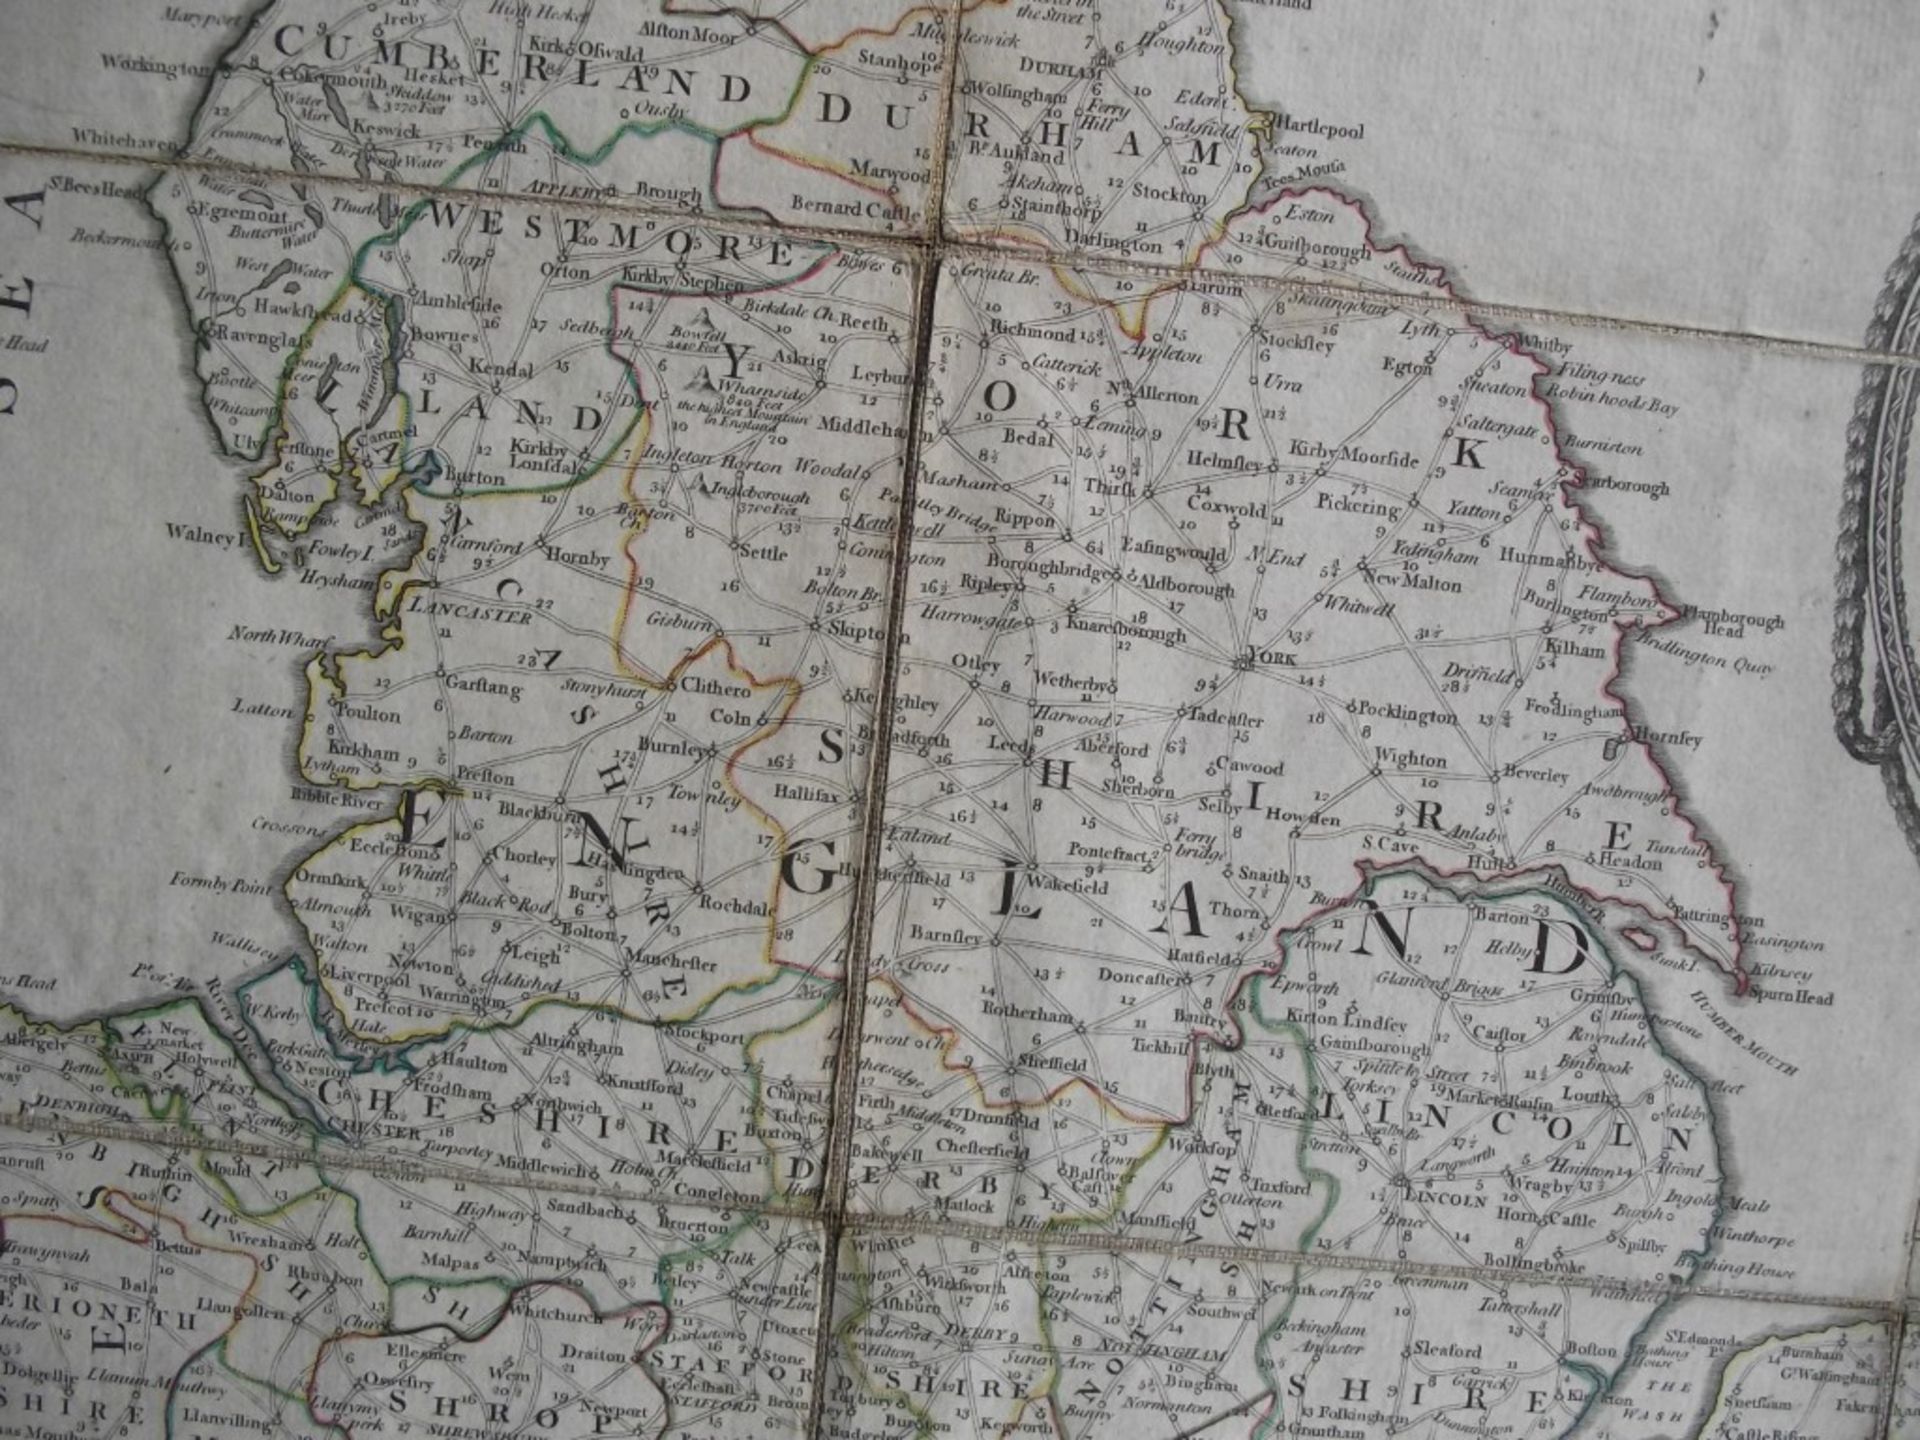 A New Map of the Roads of Ireland and Scotland - by Laurie & Whittle - 12th May 1794 - Original c... - Image 18 of 31